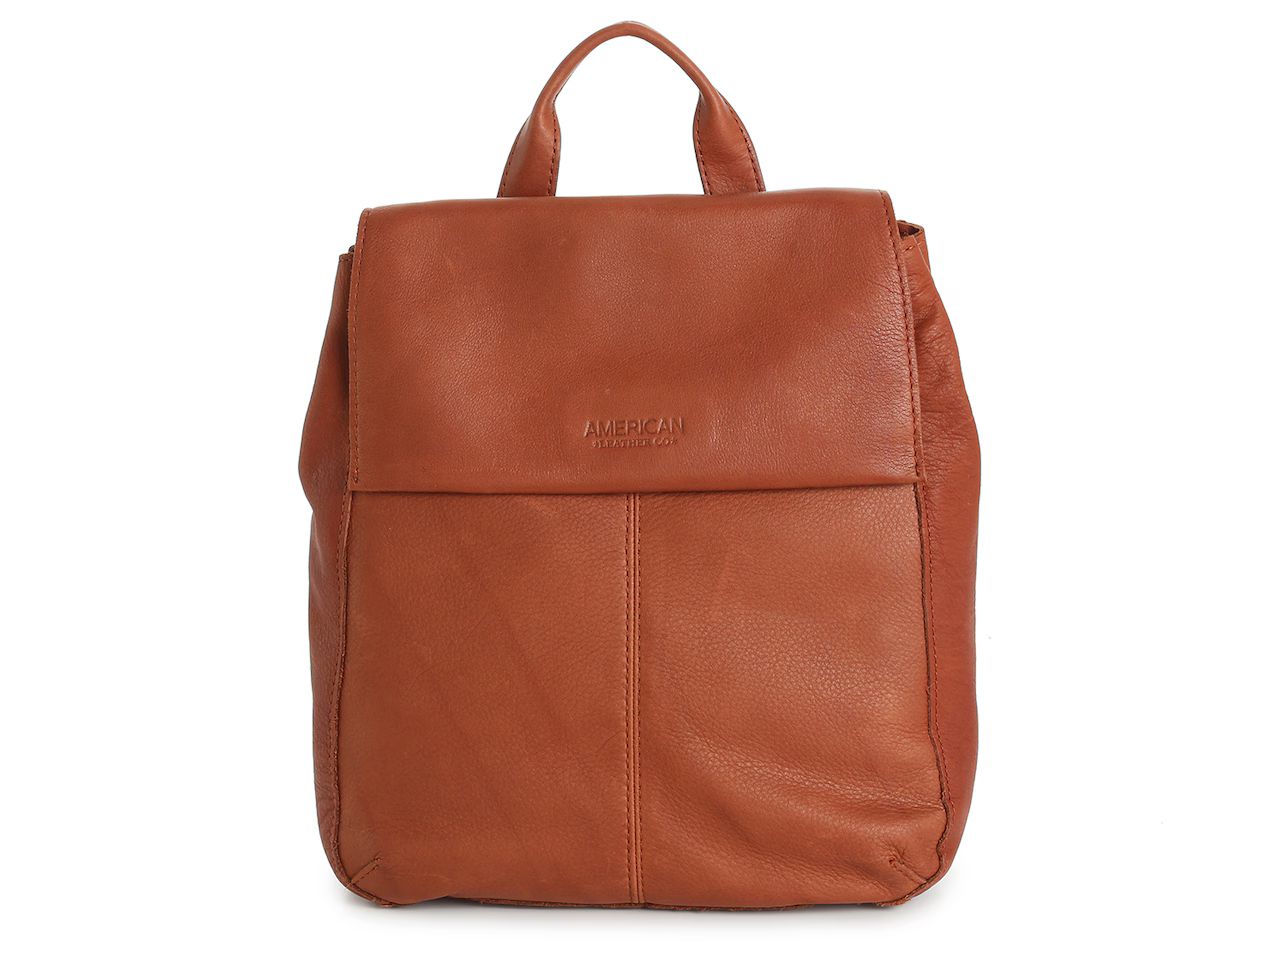 American Leather Co. Leather Backpack | DSW